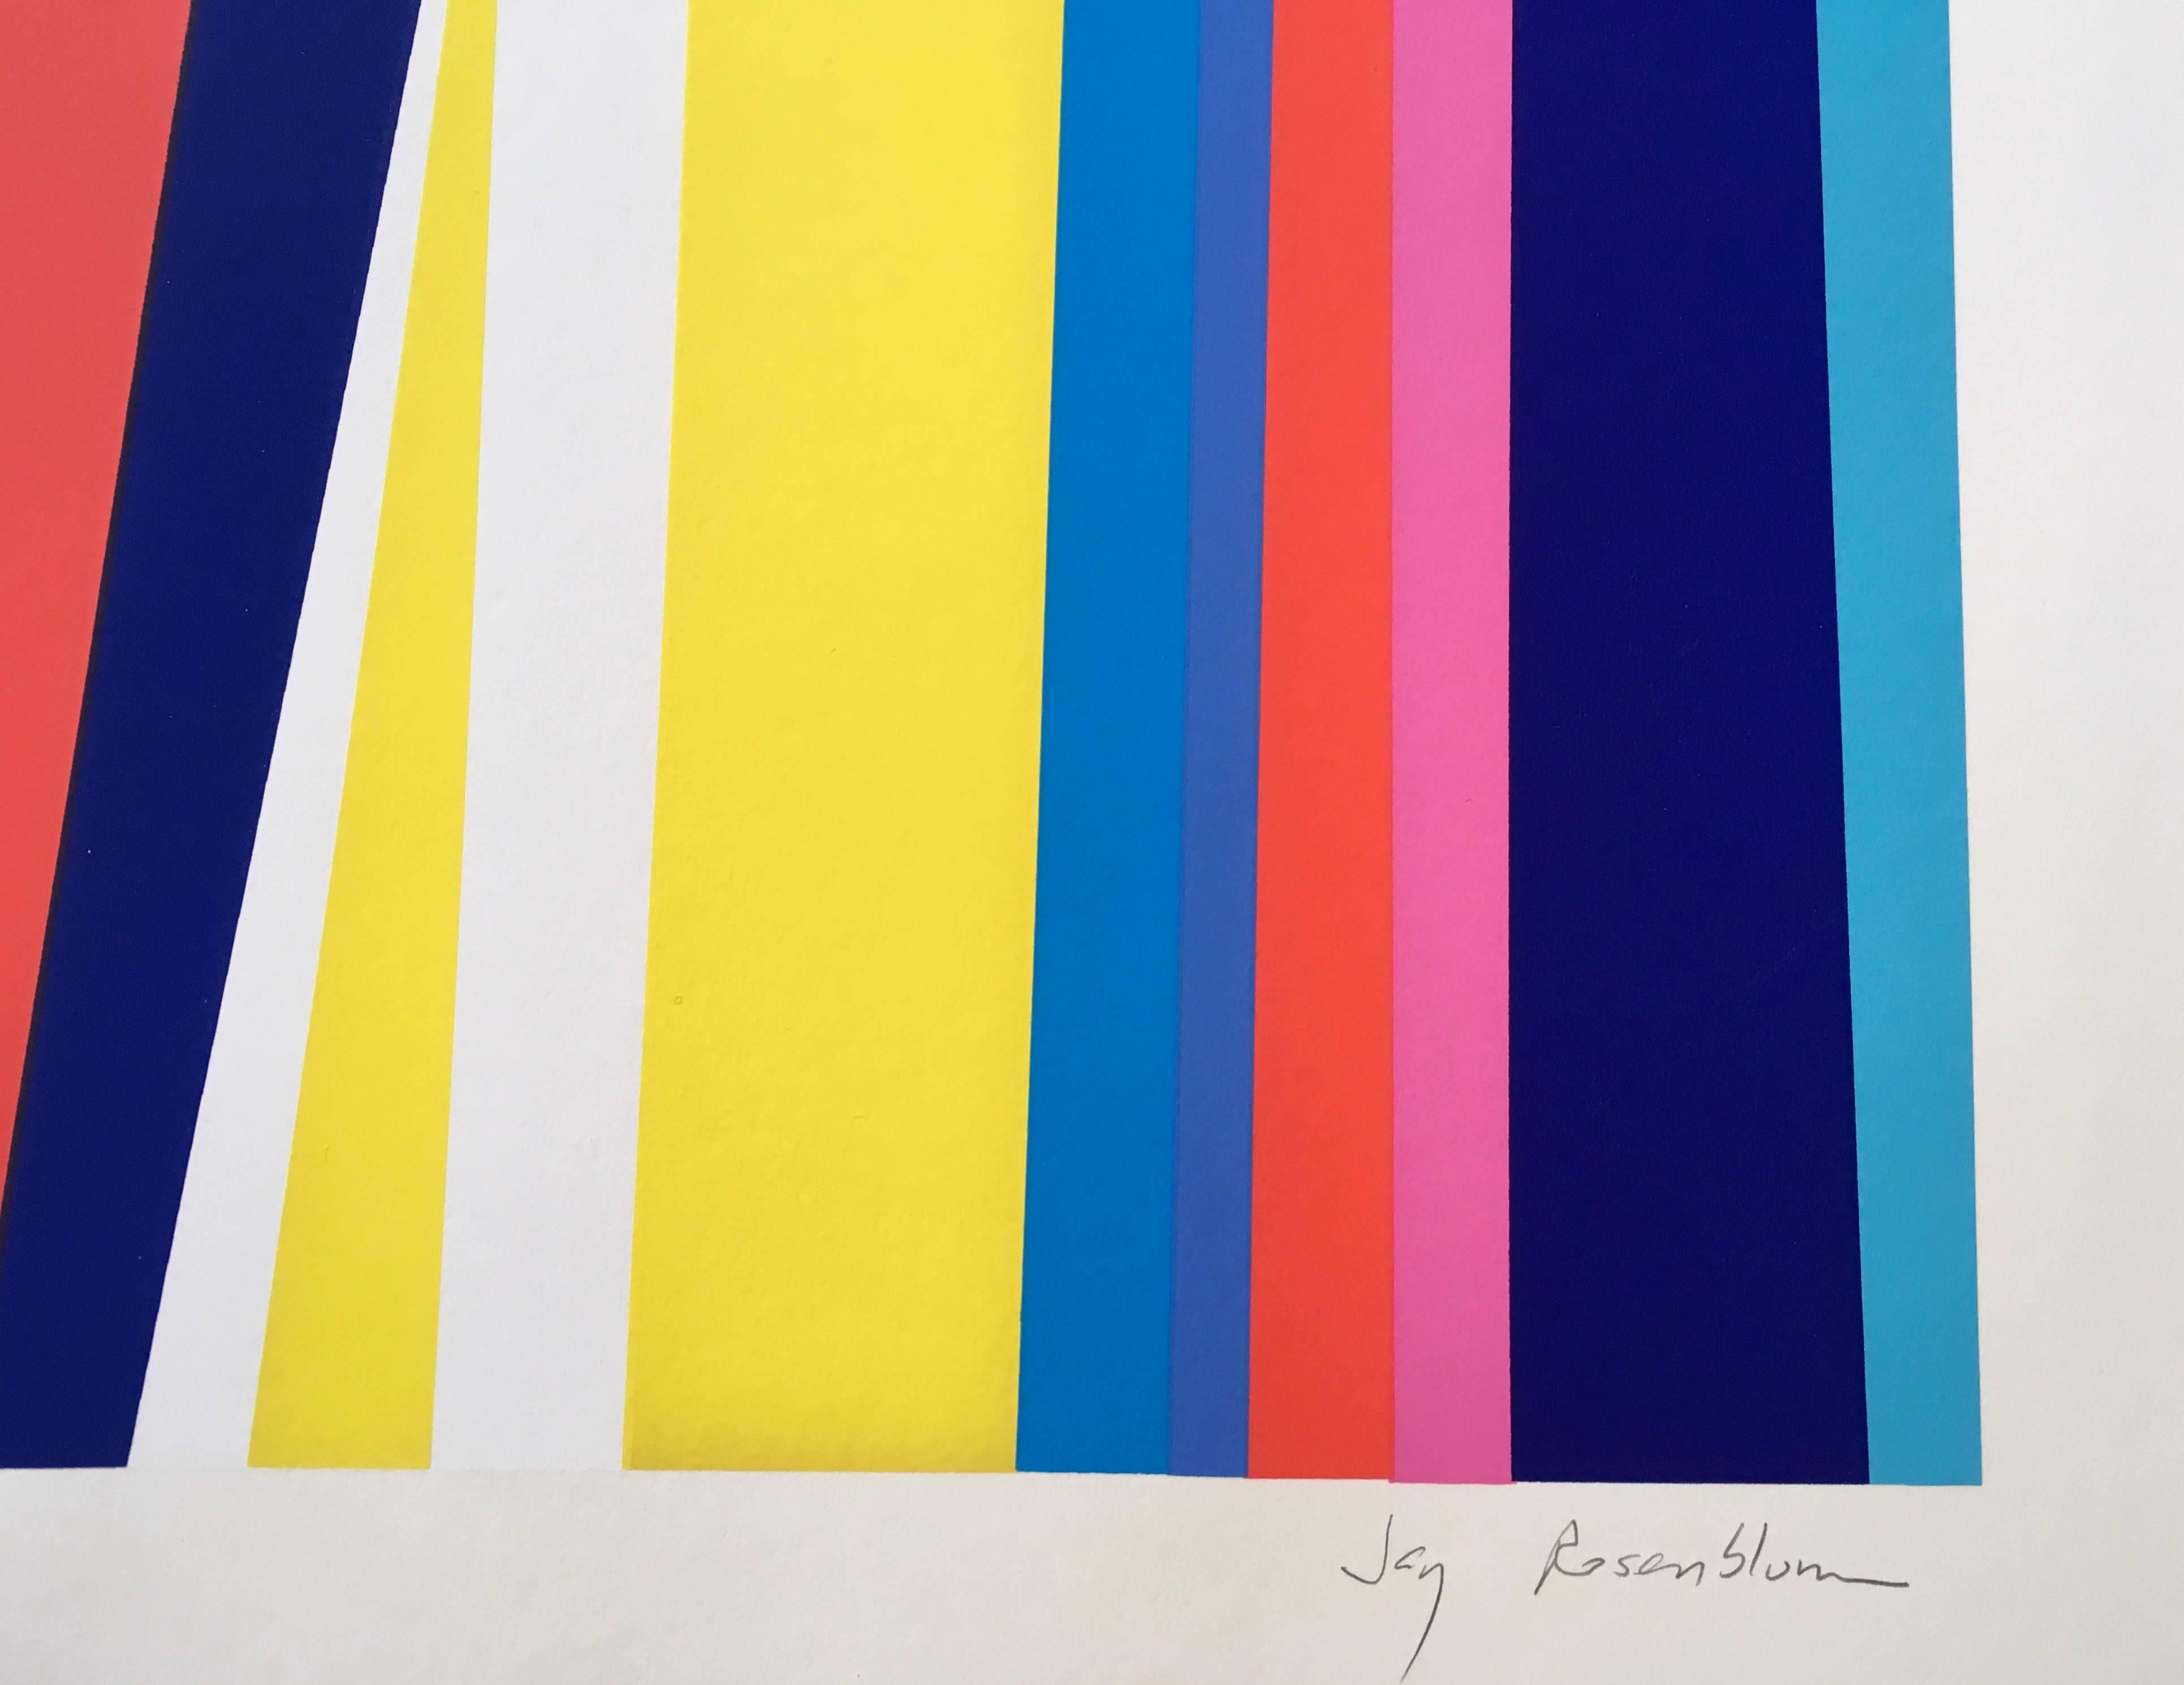 Serigraph by American abstract expressionist and color field artist Jay Rosenblum (1933-1989). The colors are pristine. The print is signed and numbered by the artist and is from an edition of 100.